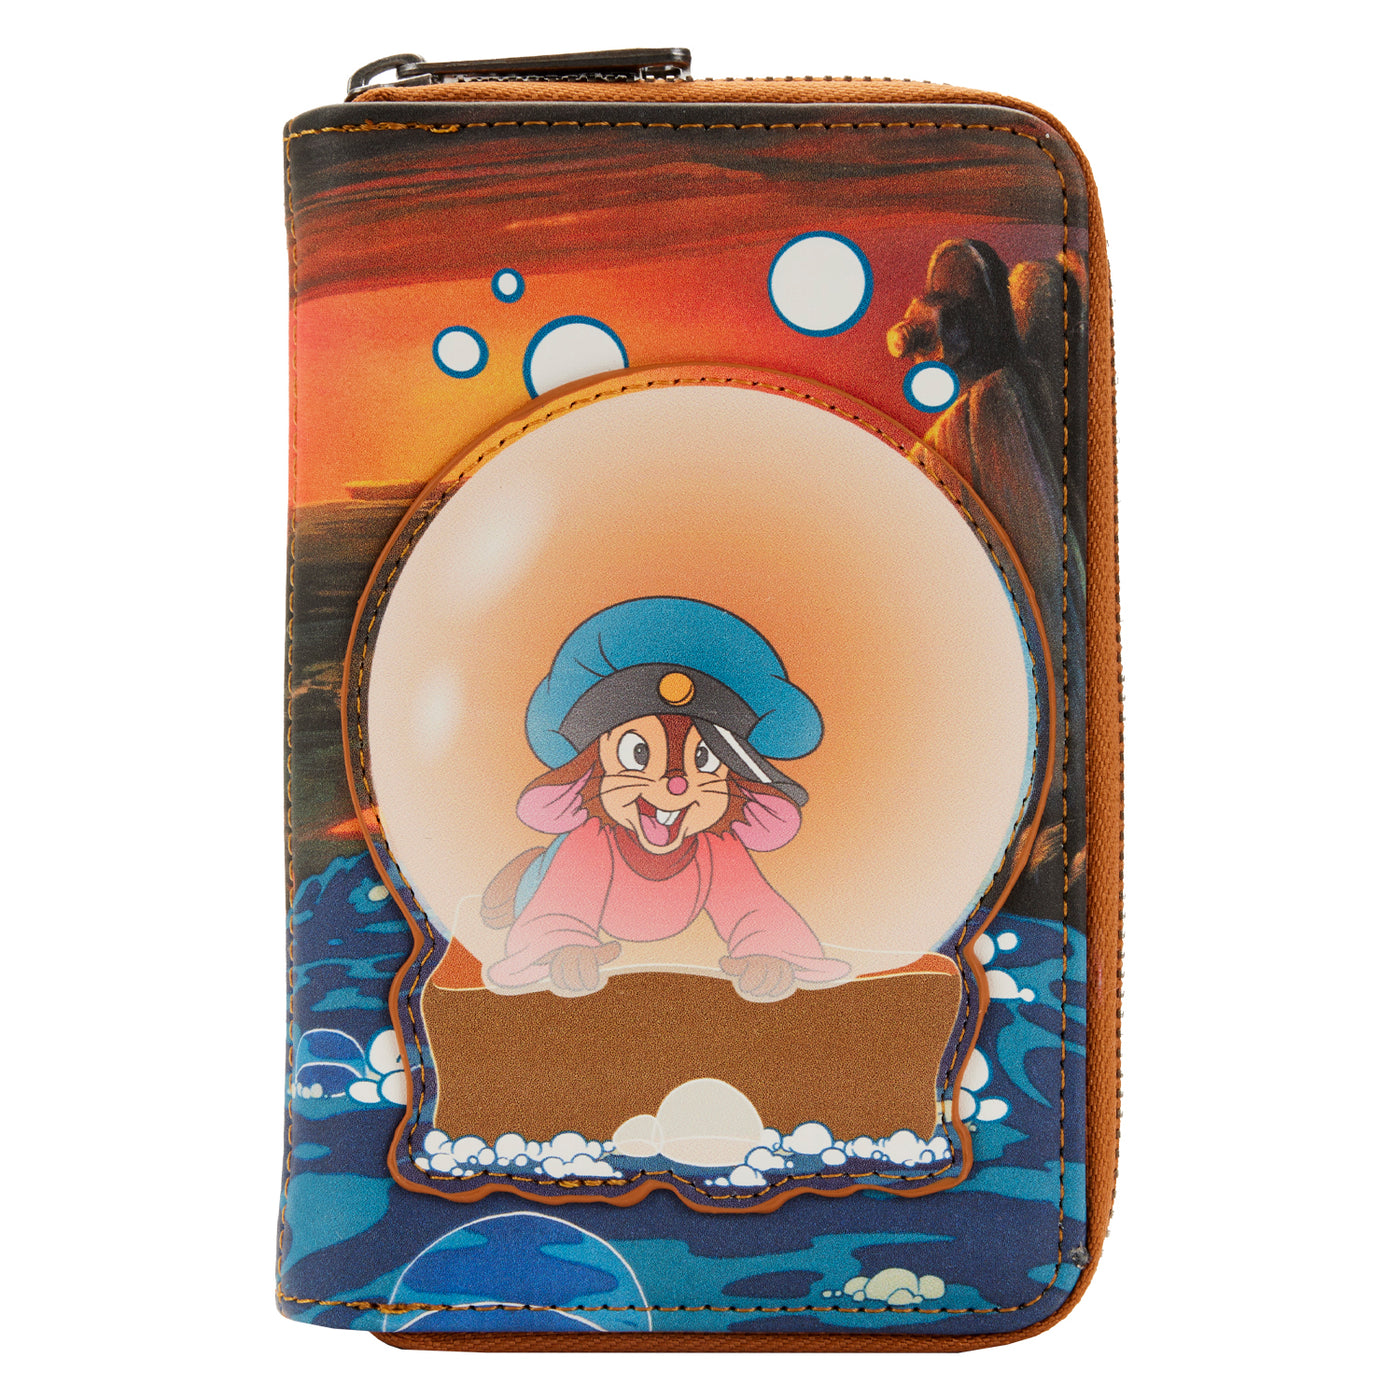 Loungefly An American Tail Fievel Bubbles Wallet